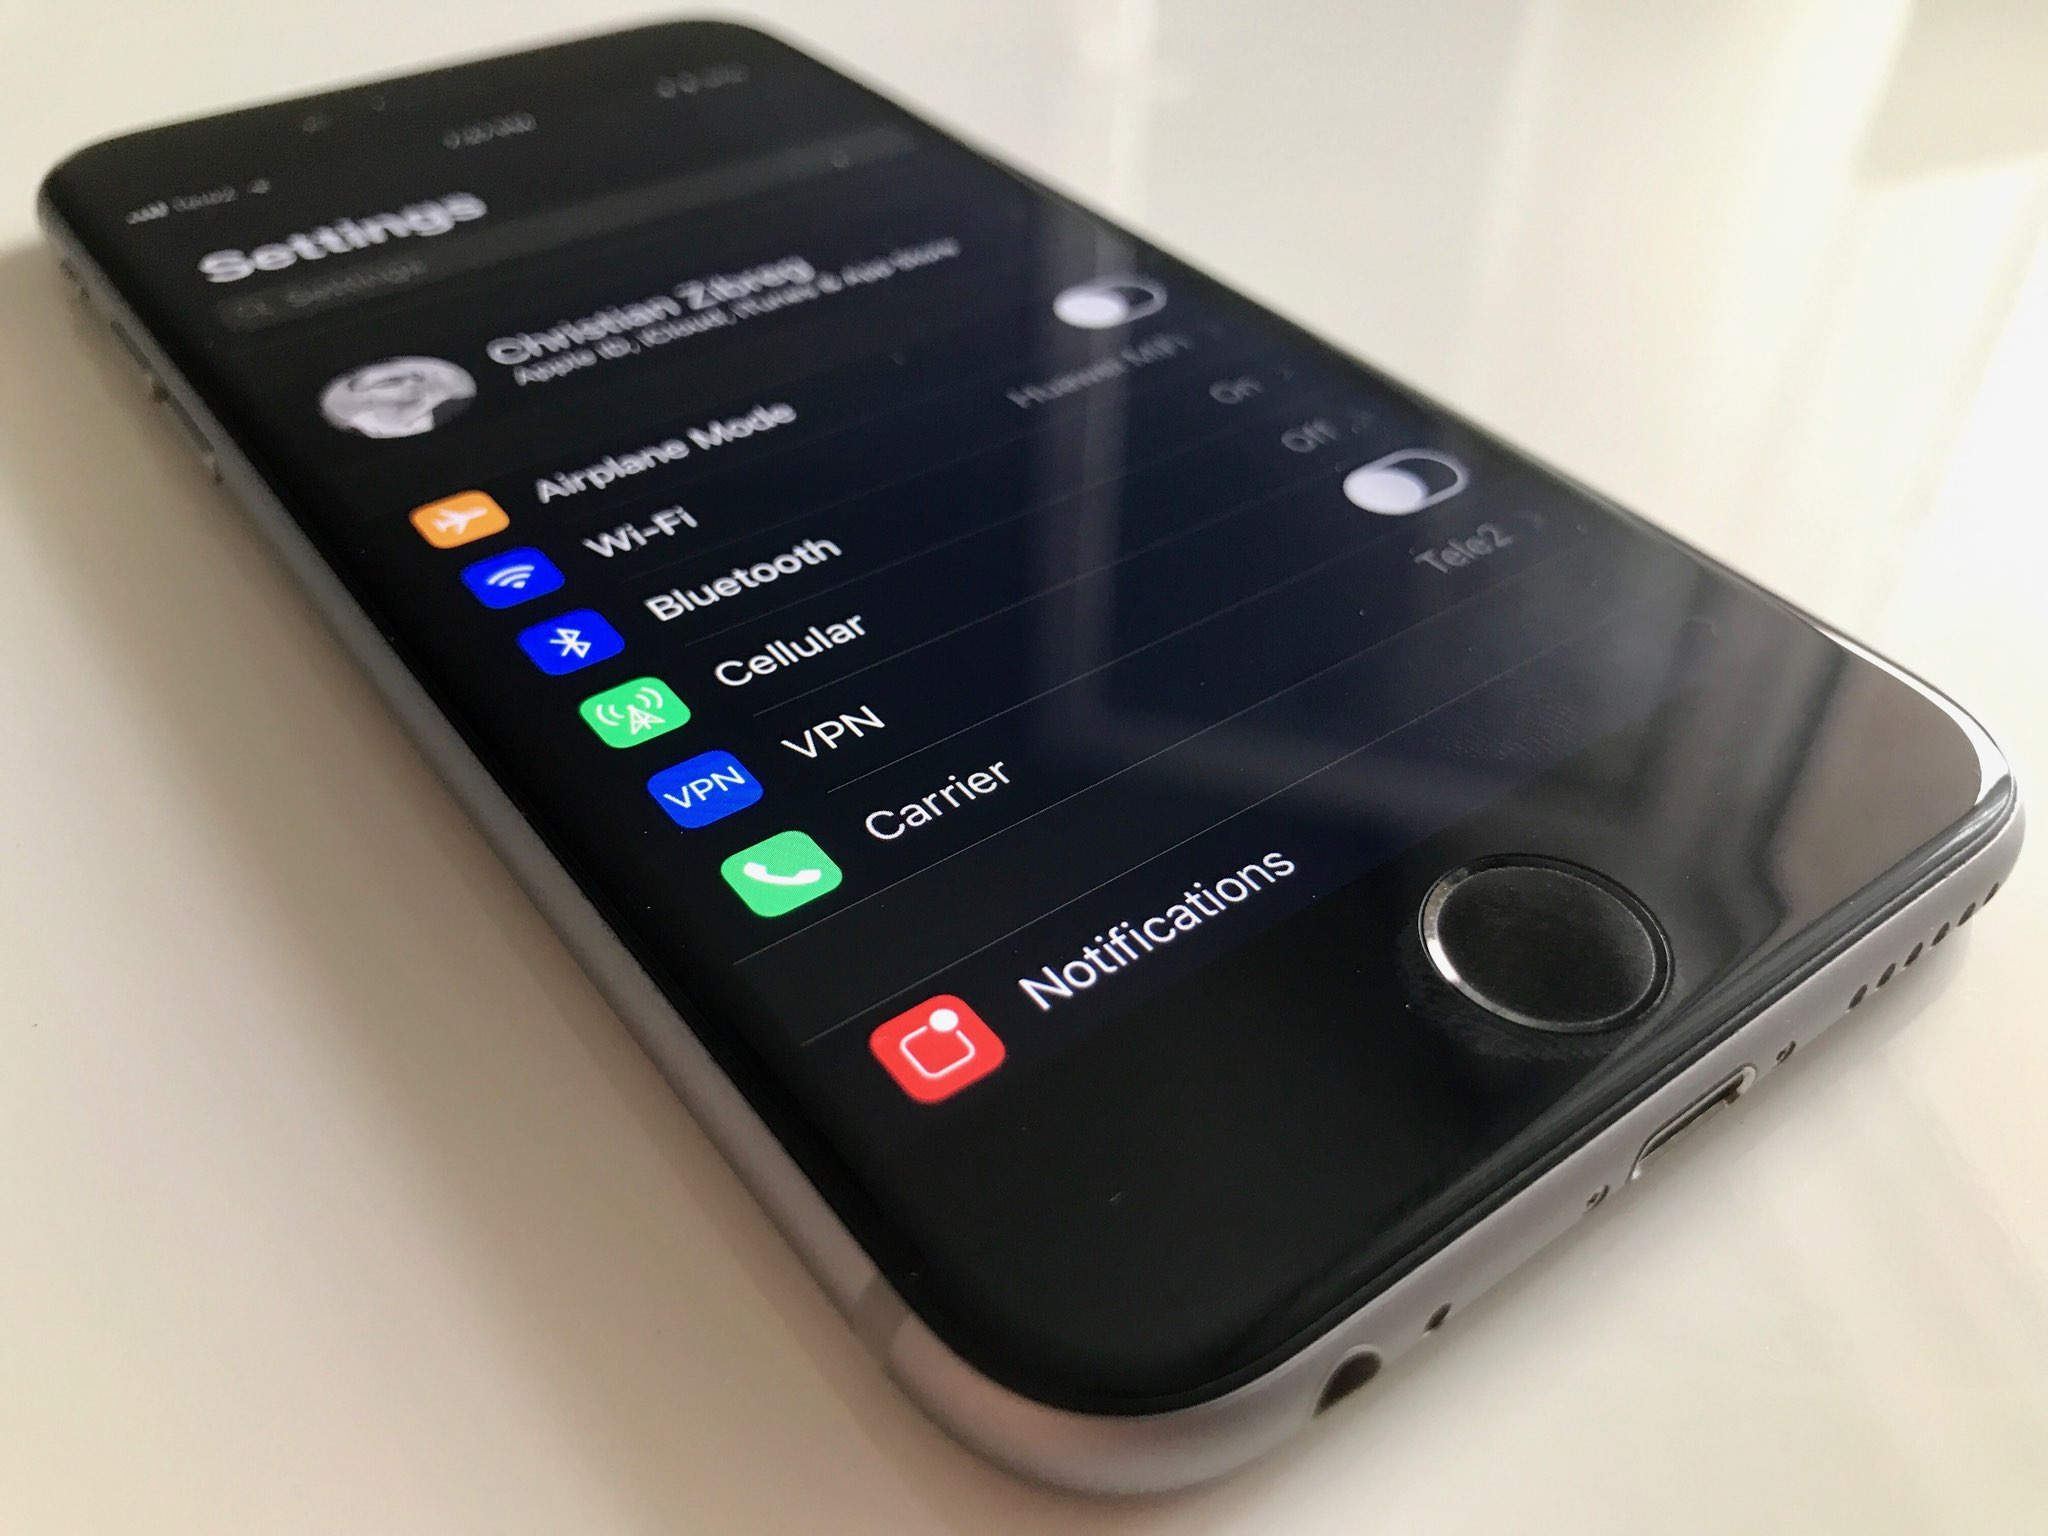 iOS 11's Settings app with simulated dark mode via the Smart Invert option